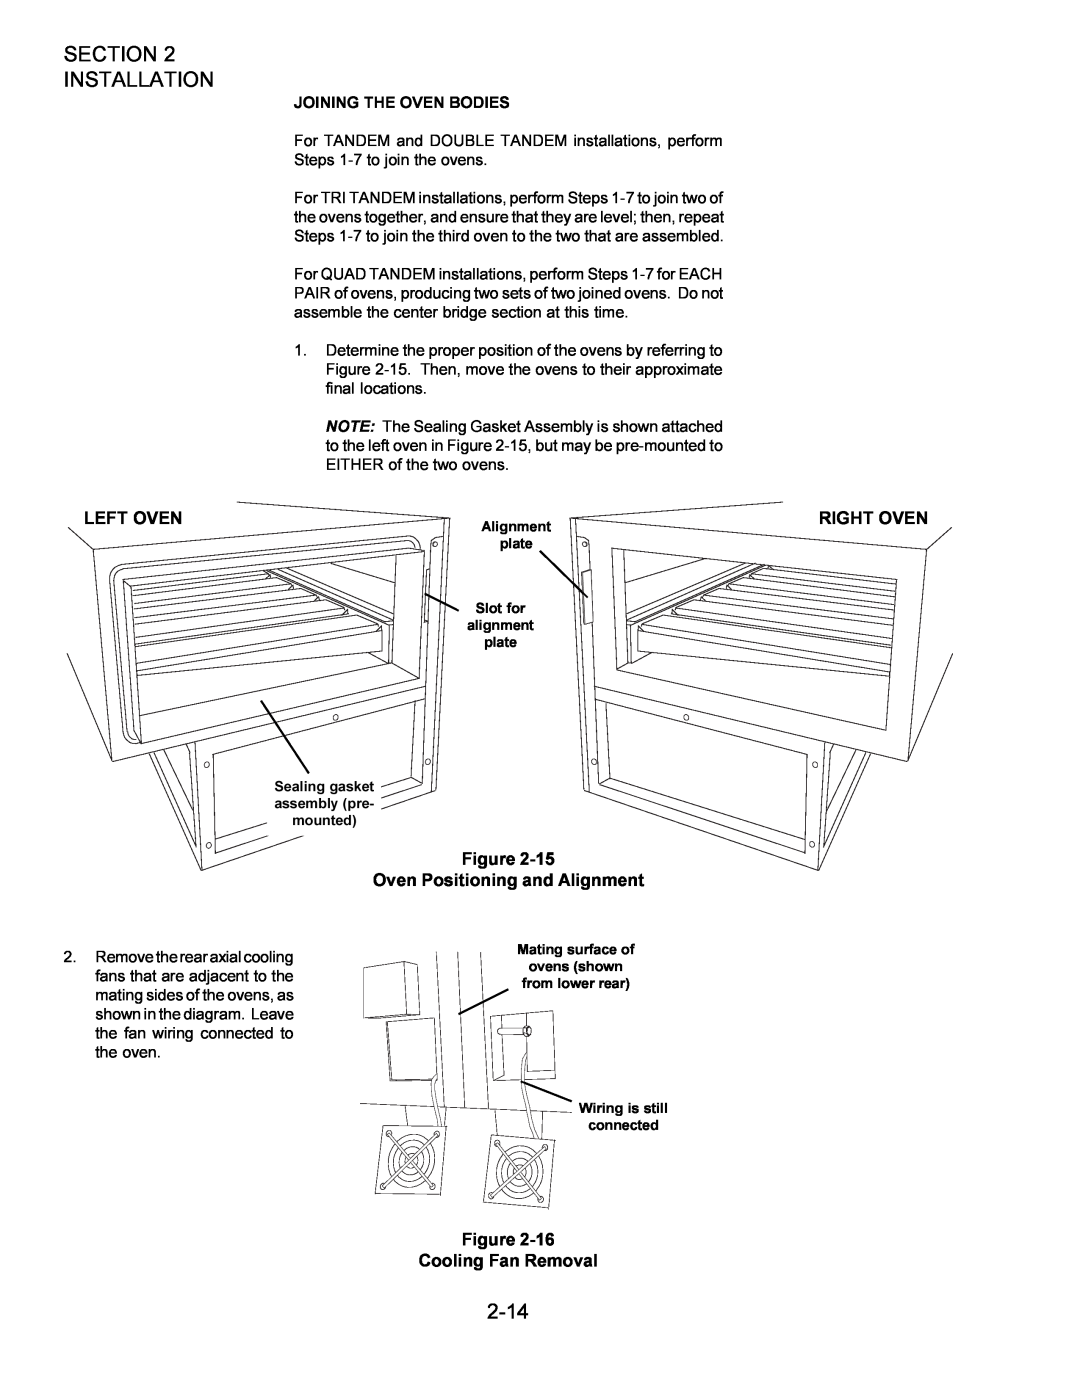 Middleby Marshall owner manual 2-14, Left Oven, Right Oven, Oven Positioning and Alignment, Cooling Fan Removal 